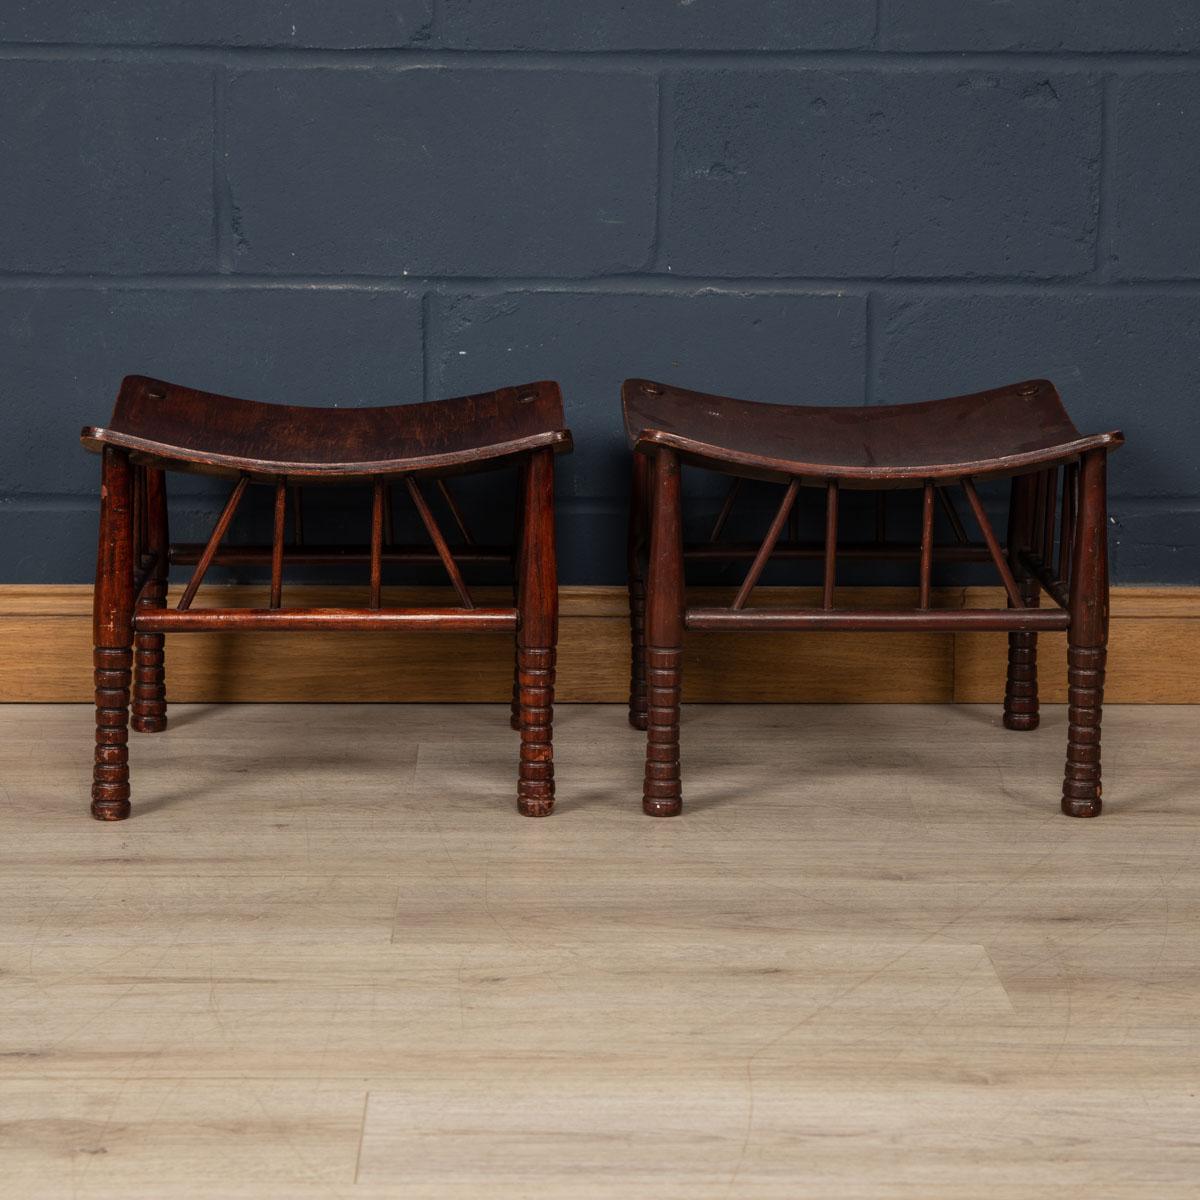 Egyptian 20th Century English Pair of Thebes Stools by Liberty & Co.